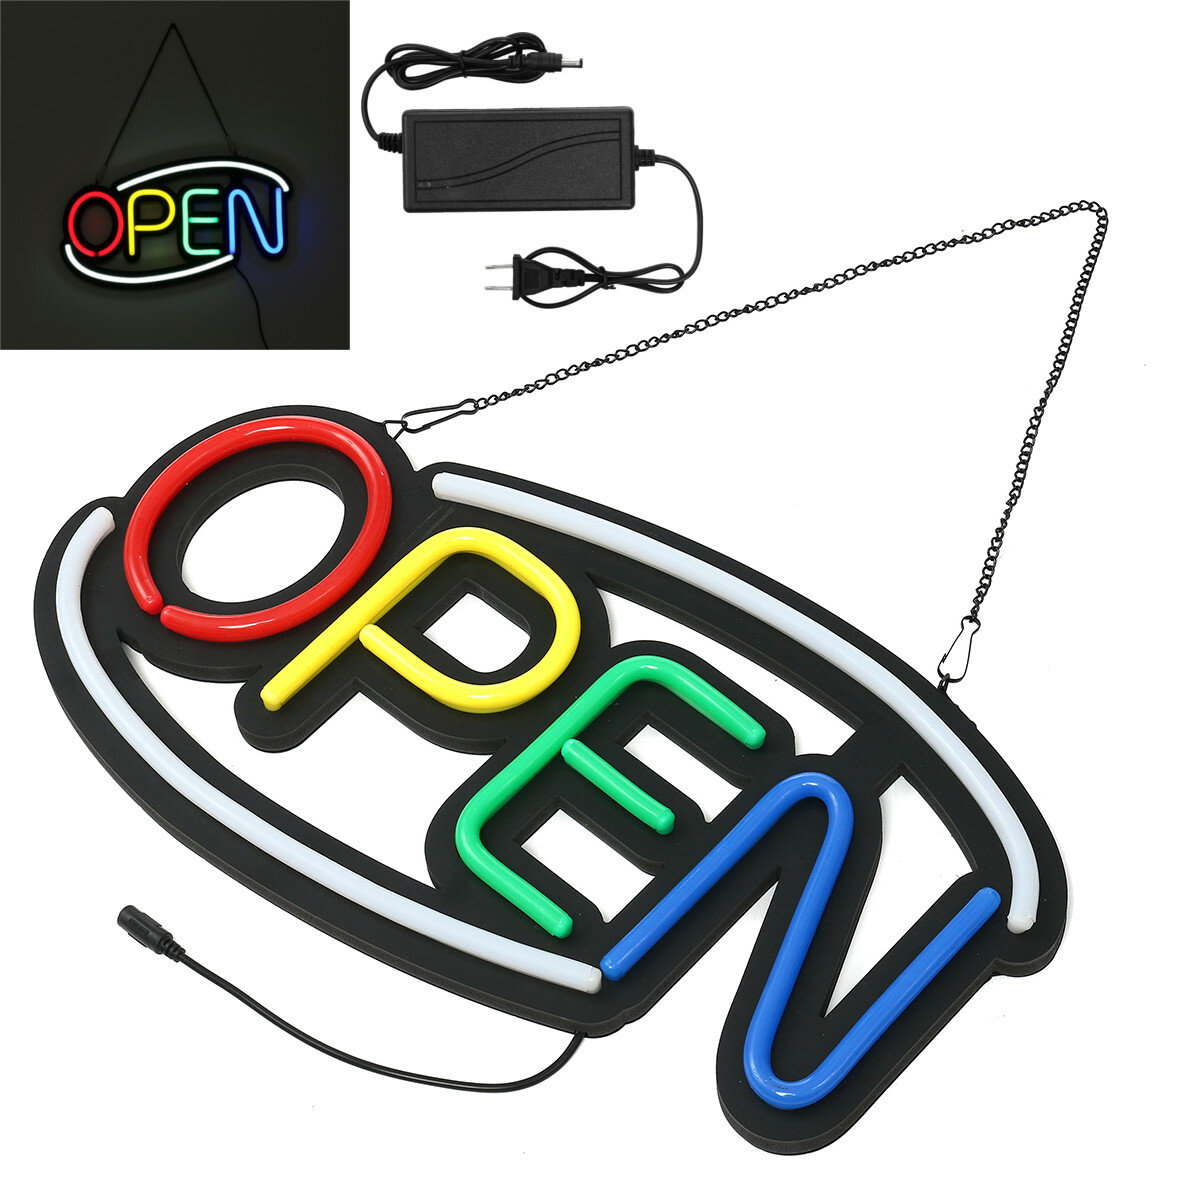 

50x26cm LED Neon OPEN Sign Light Display Business Cafe Bar Club Store Wall Advertising Decor US Plug